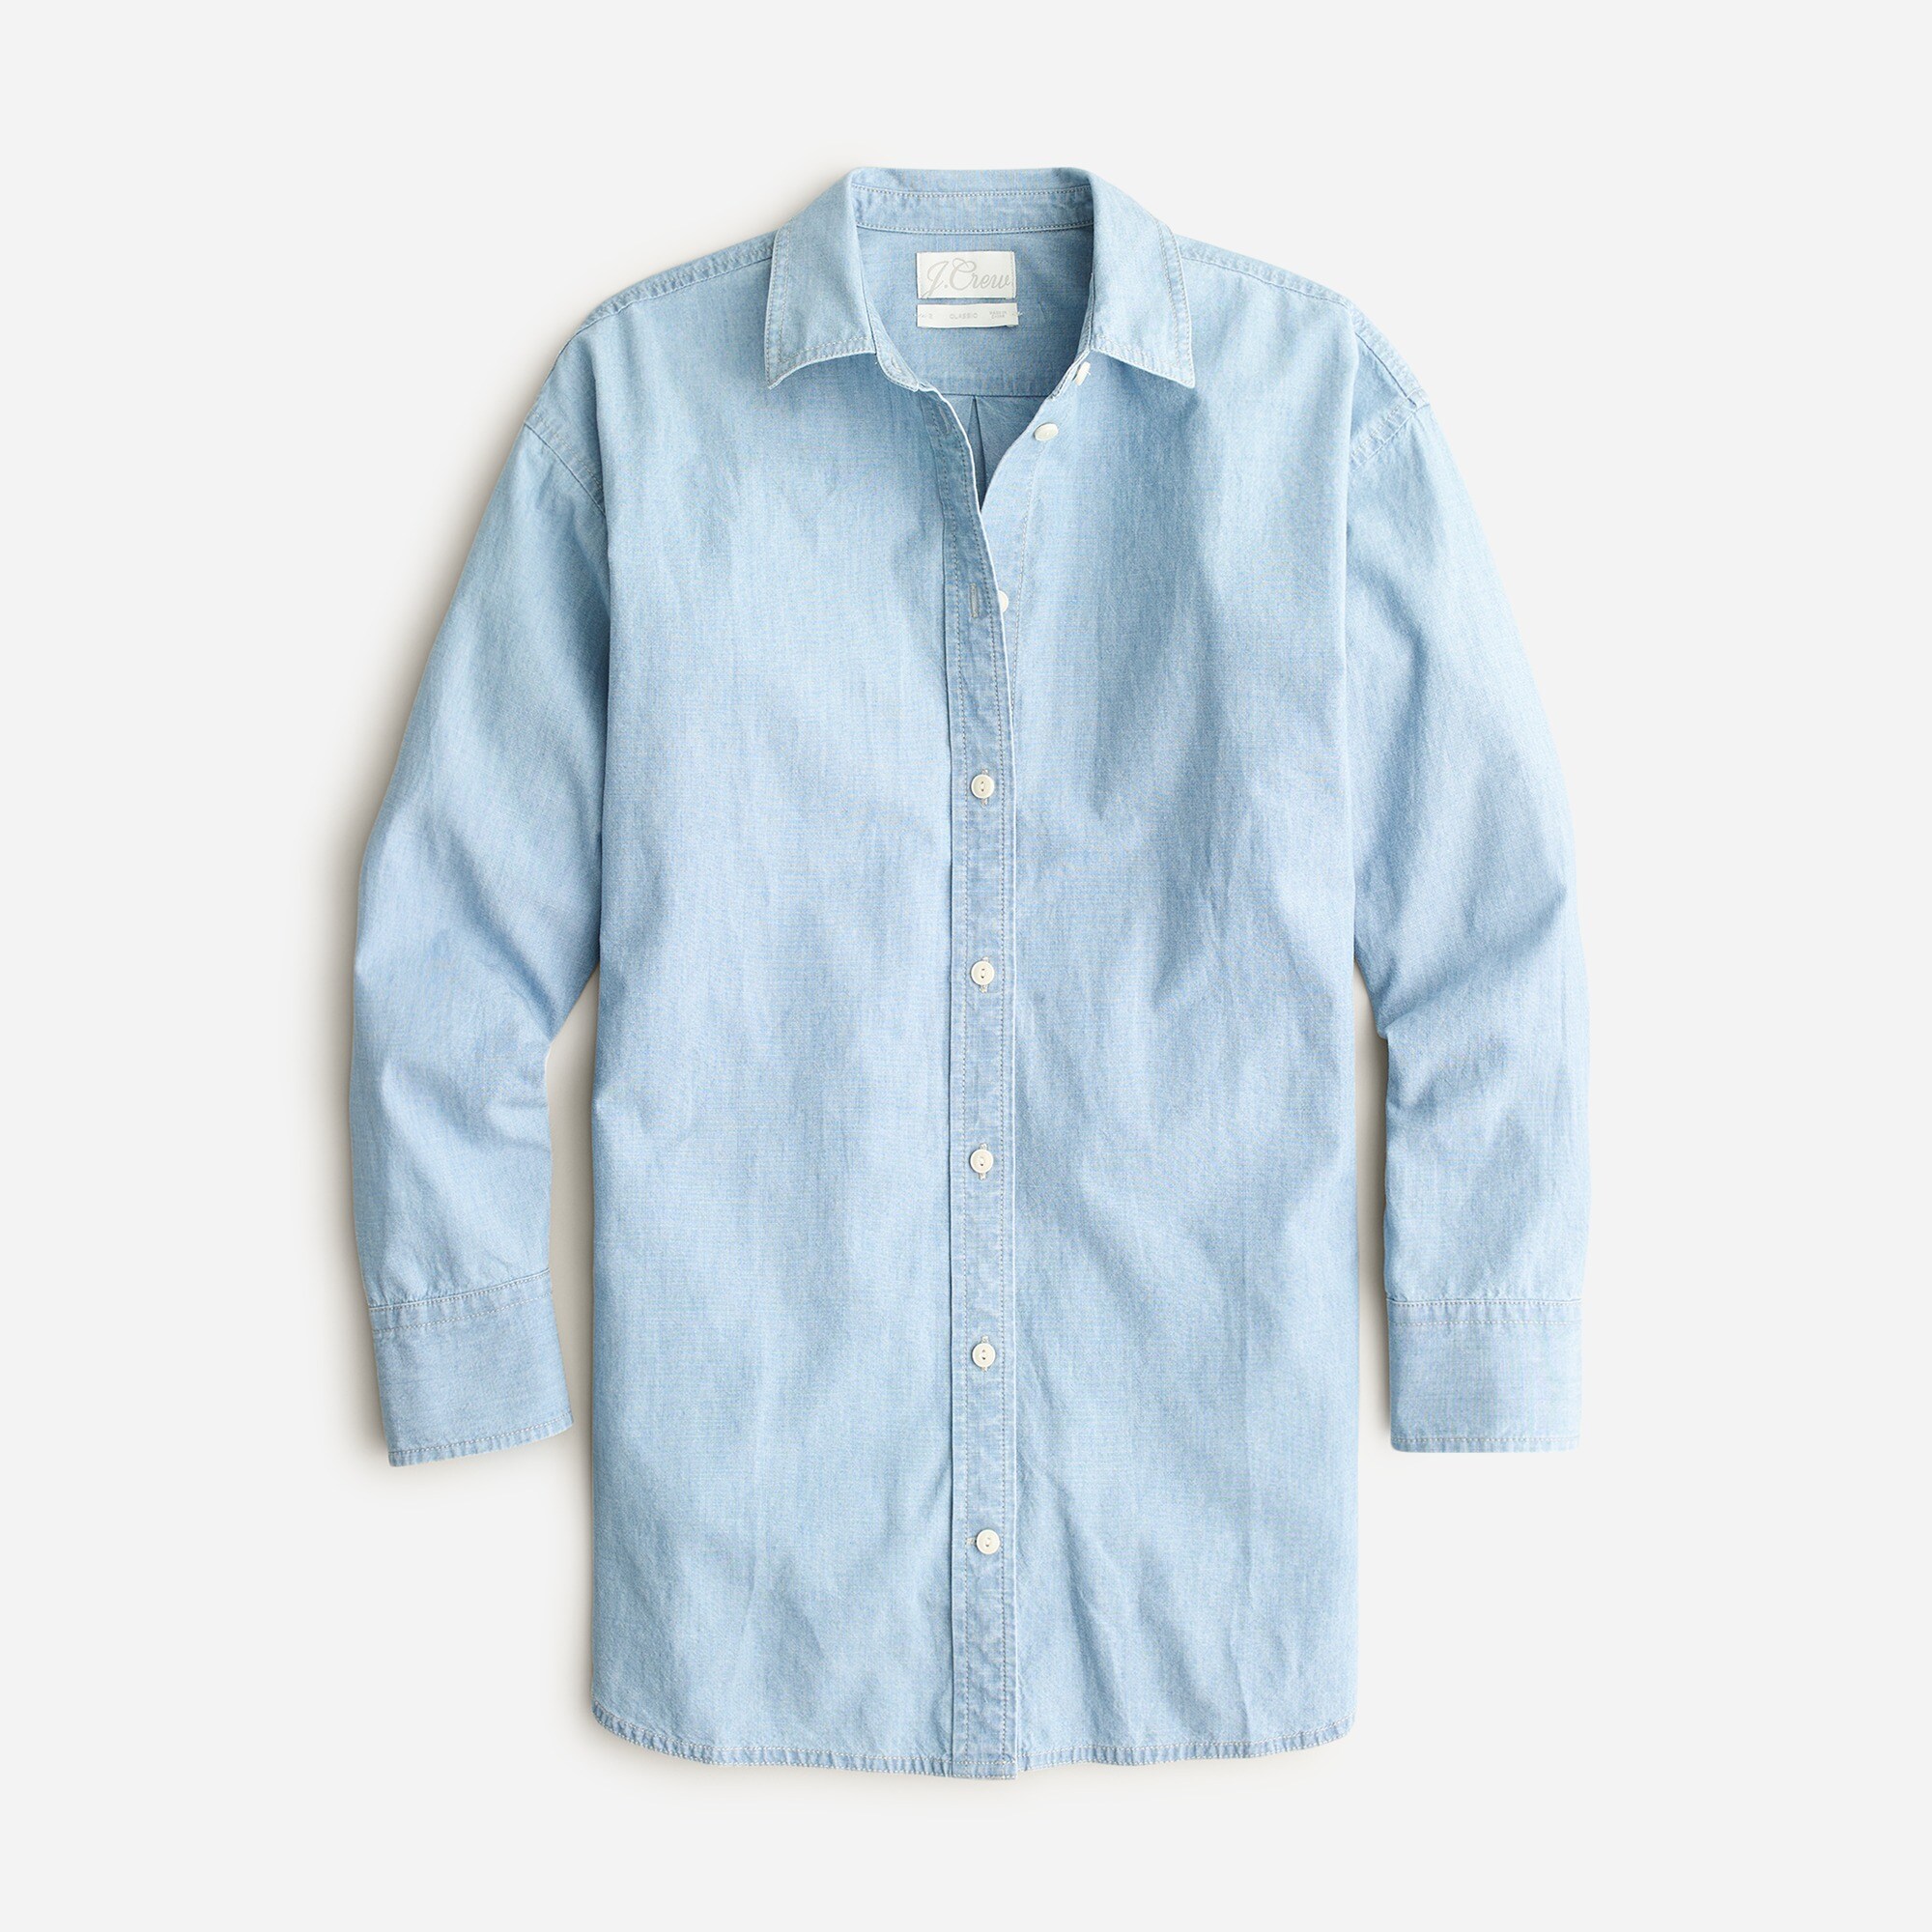  Relaxed-fit chambray shirt